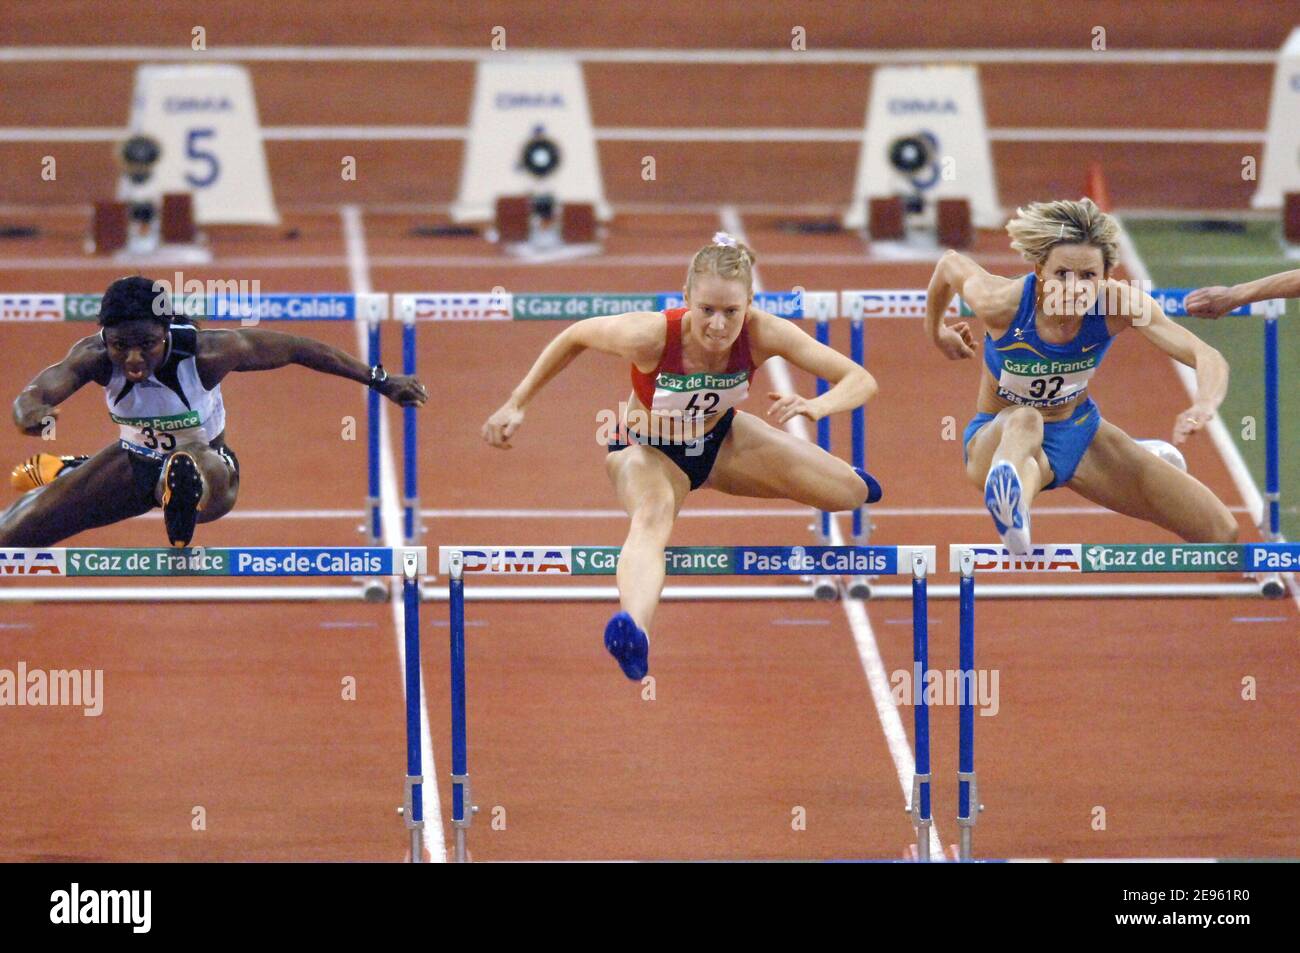 Ireland's O'Rourke Derval (62) competes on women's 60 meters hurdle during meeting Gaz de France of Pas-de-Calais, in Lievin, northern France, on March 3, 2006. Photo by Gouhier-Kempinaire/ABACAPRESS.COM Stock Photo